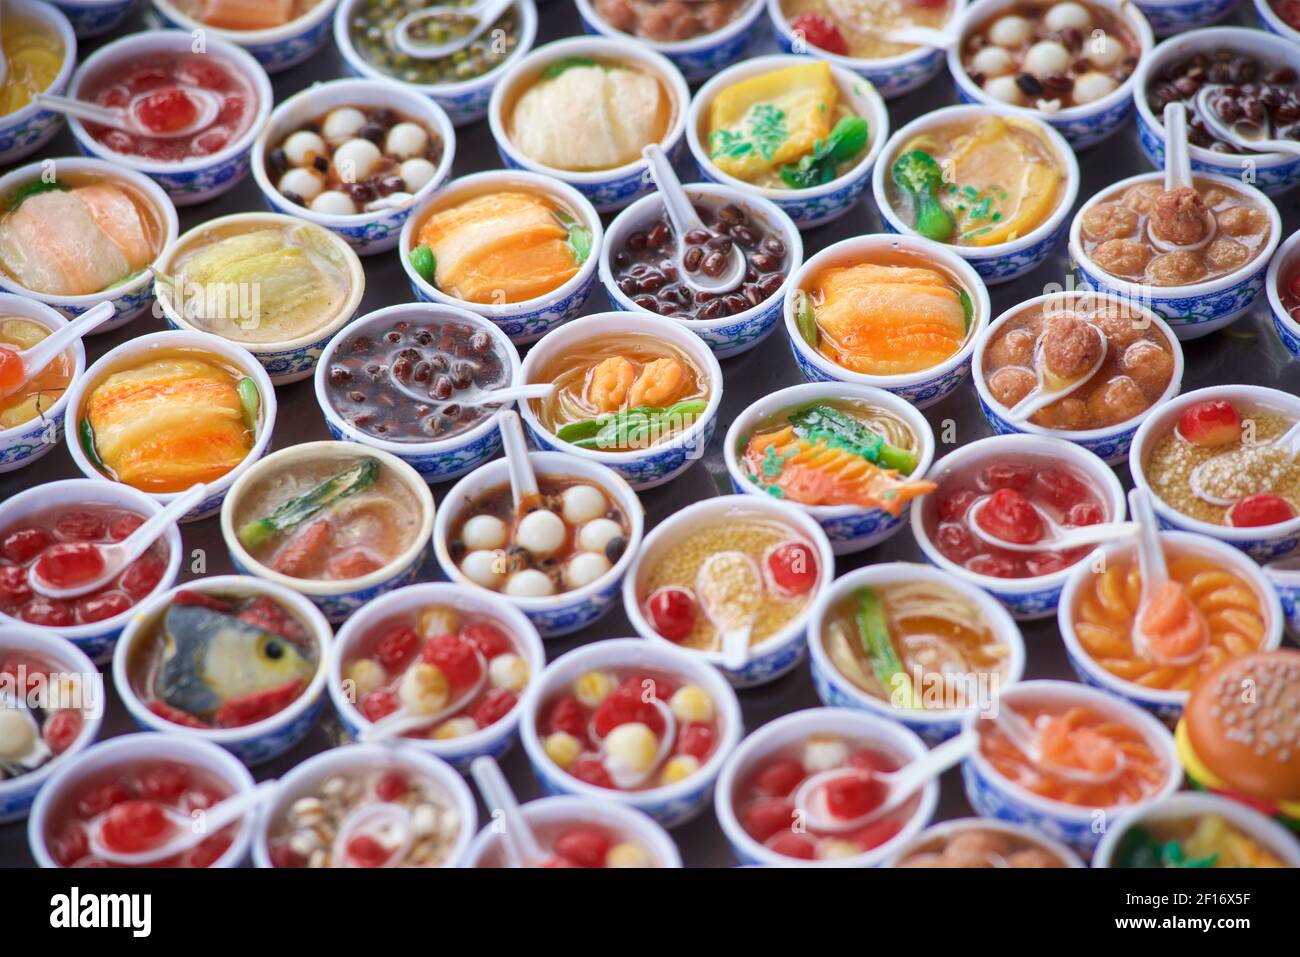 Display of small bowls of mock food being sold as fridge magnets. Souvenirs for sale, Hoi An, Vietnam Stock Photo